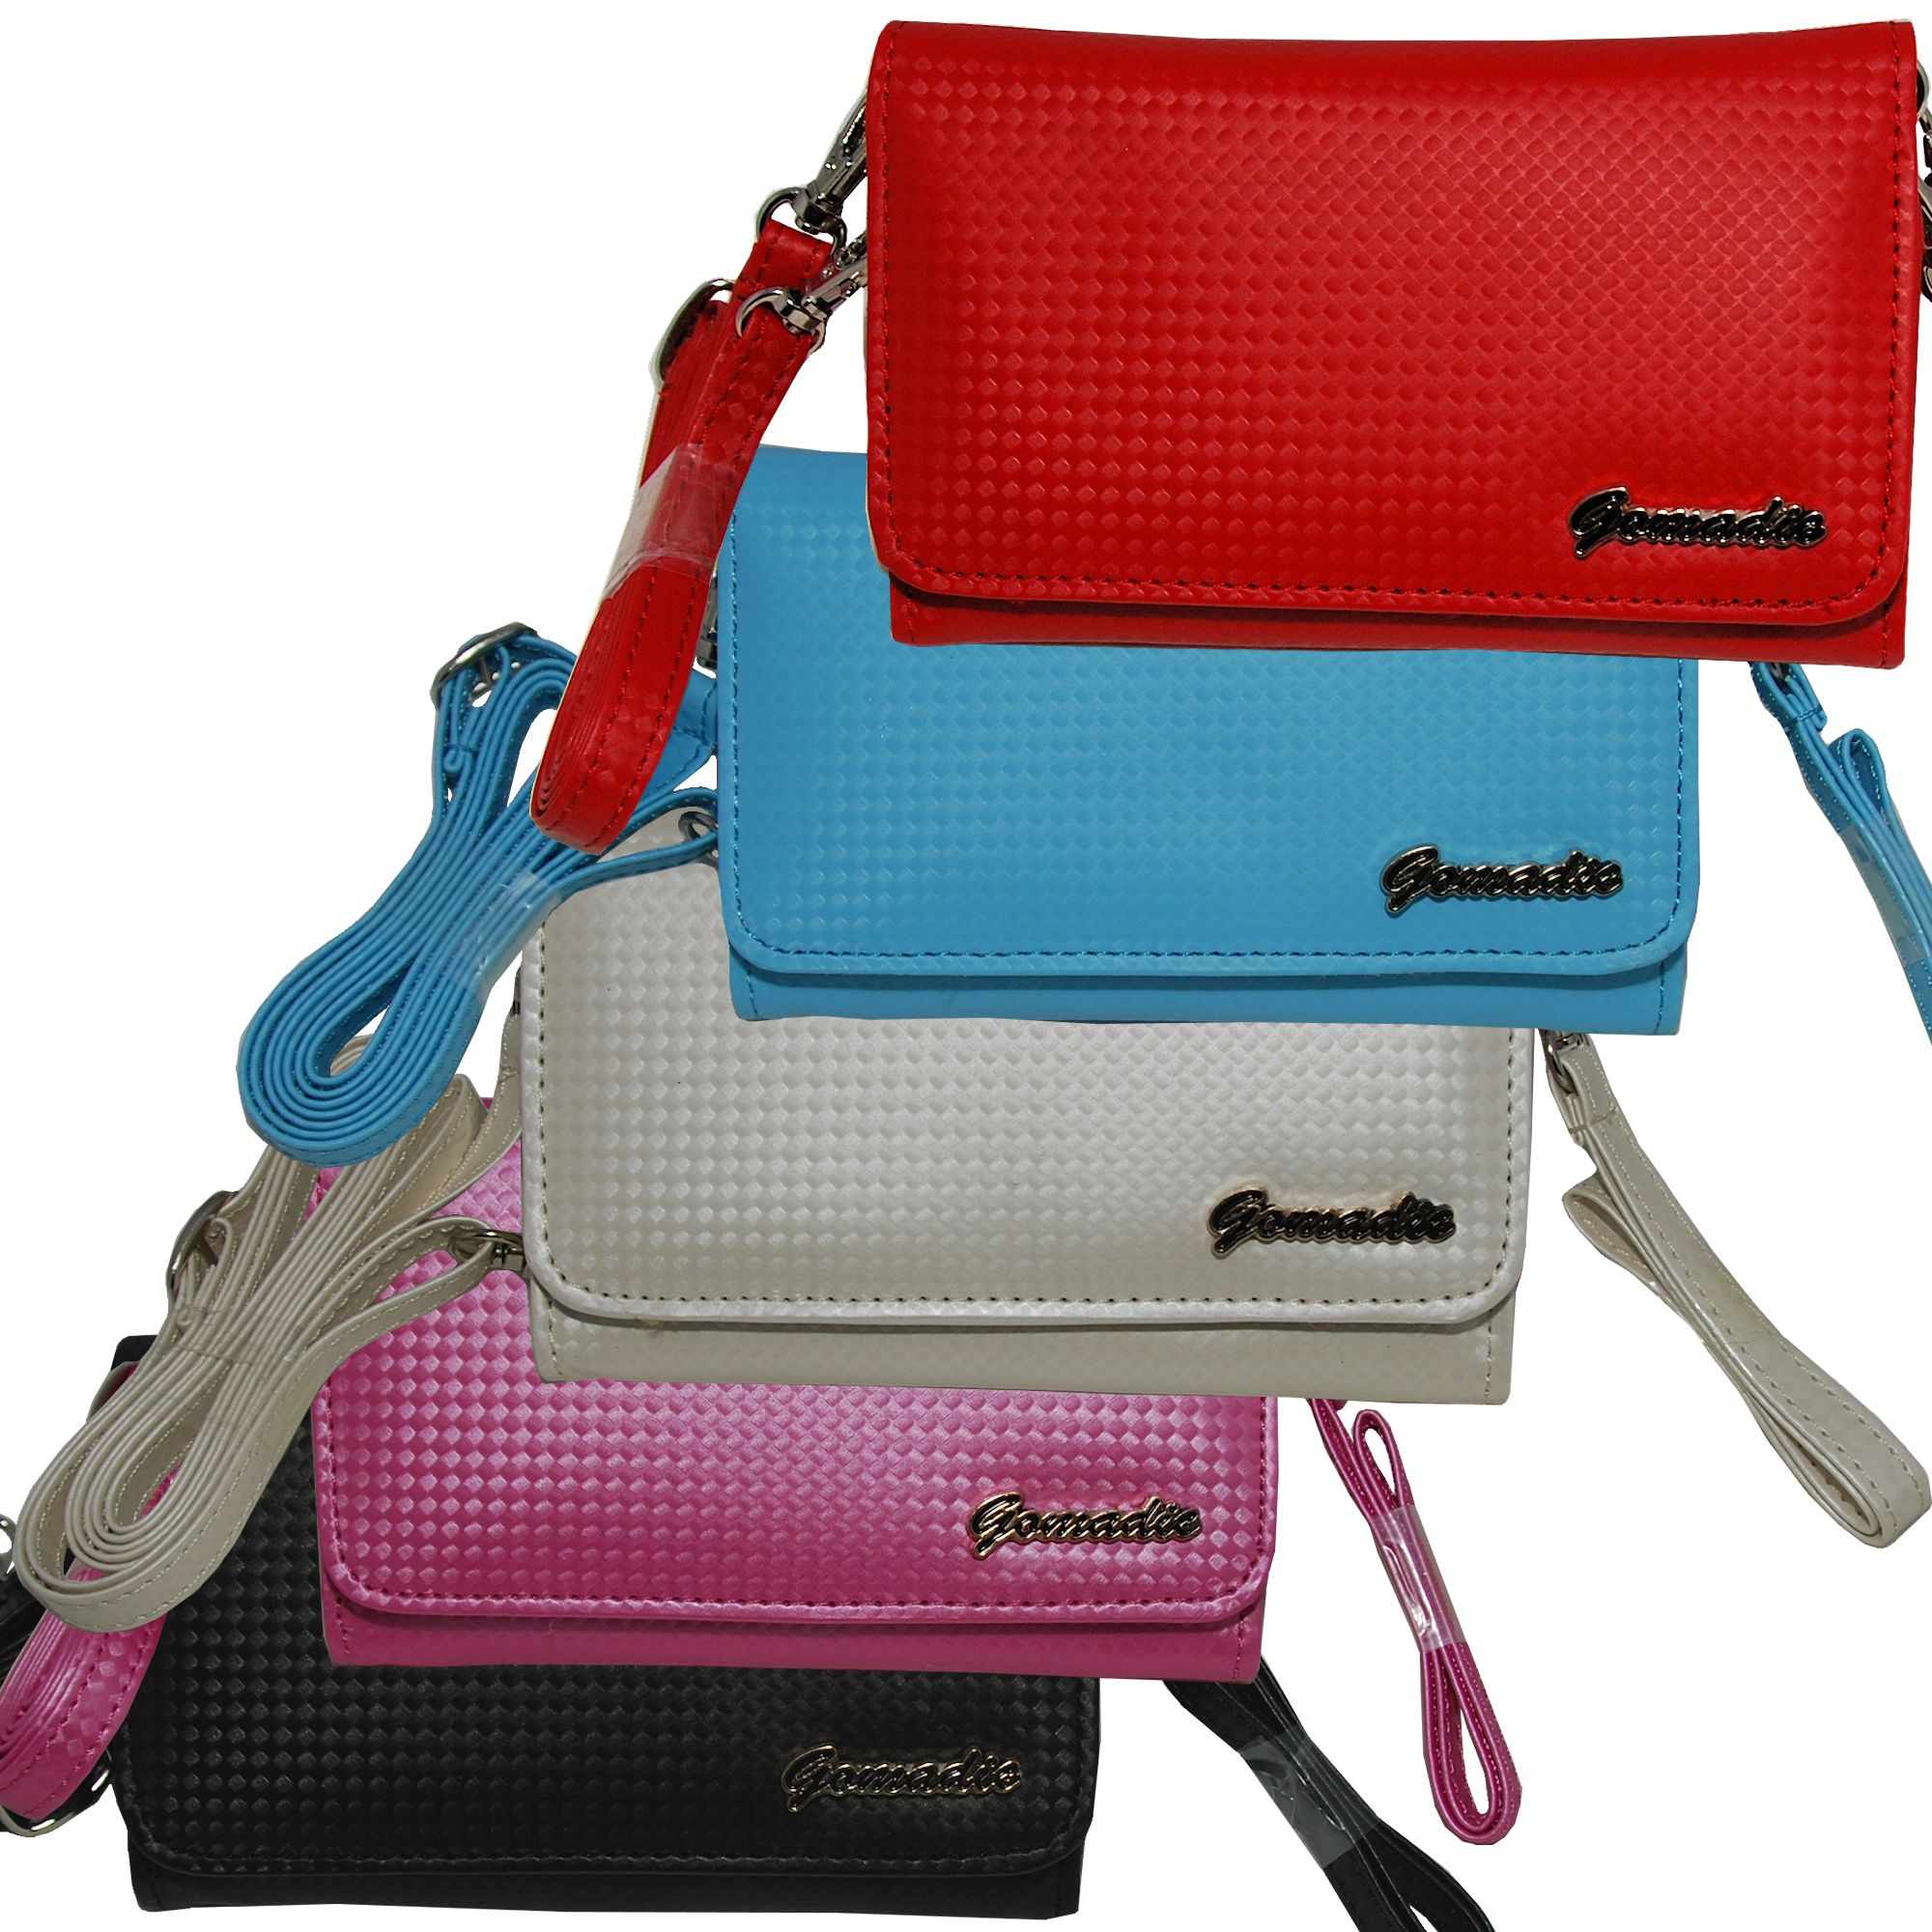 Purse Handbag Case for the Nokia 1208  - Color Options Blue Pink White Black and Red